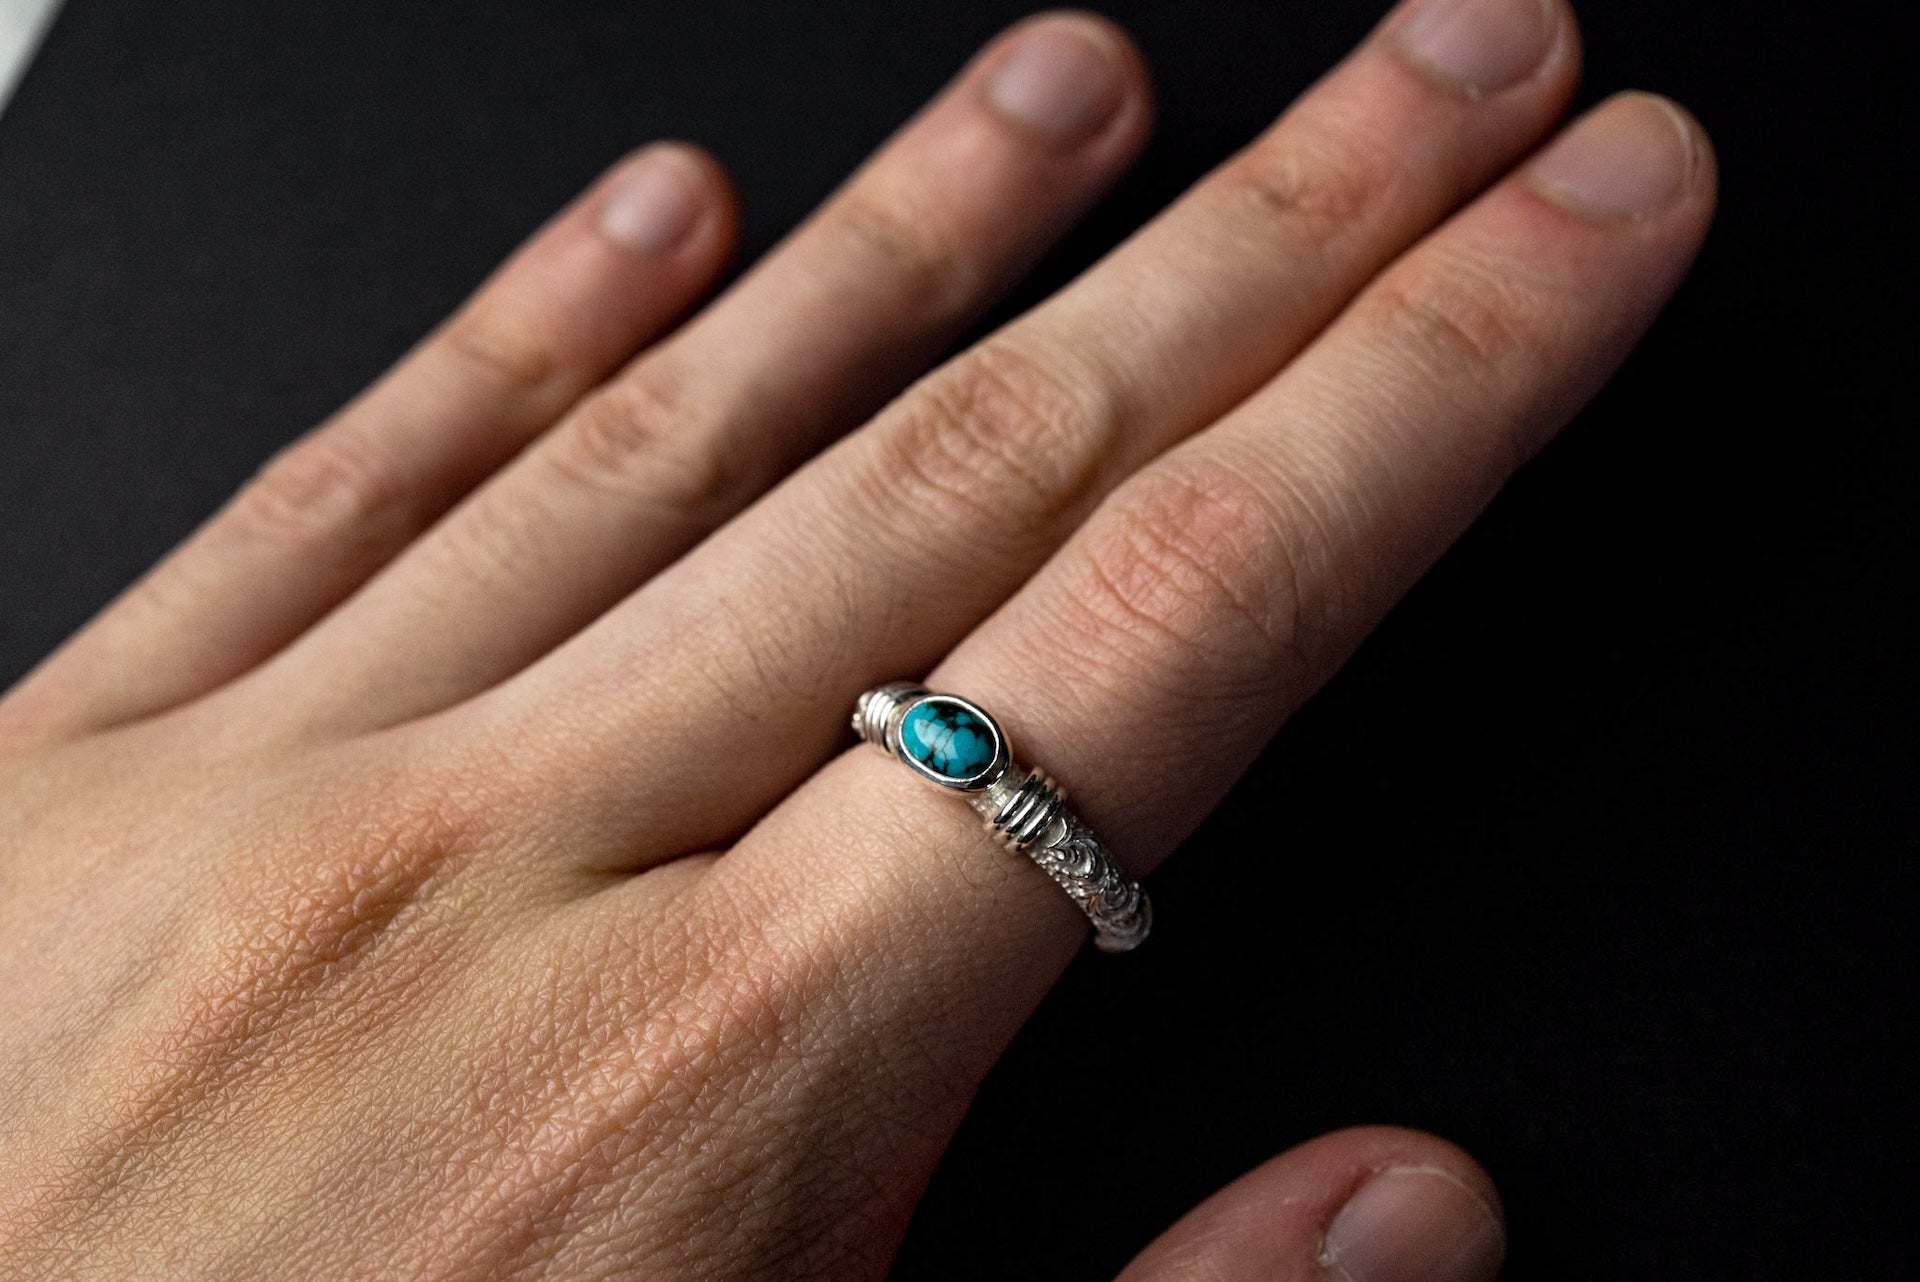 Legend Size Small "Anti-Ghost" Ring with Turquoise